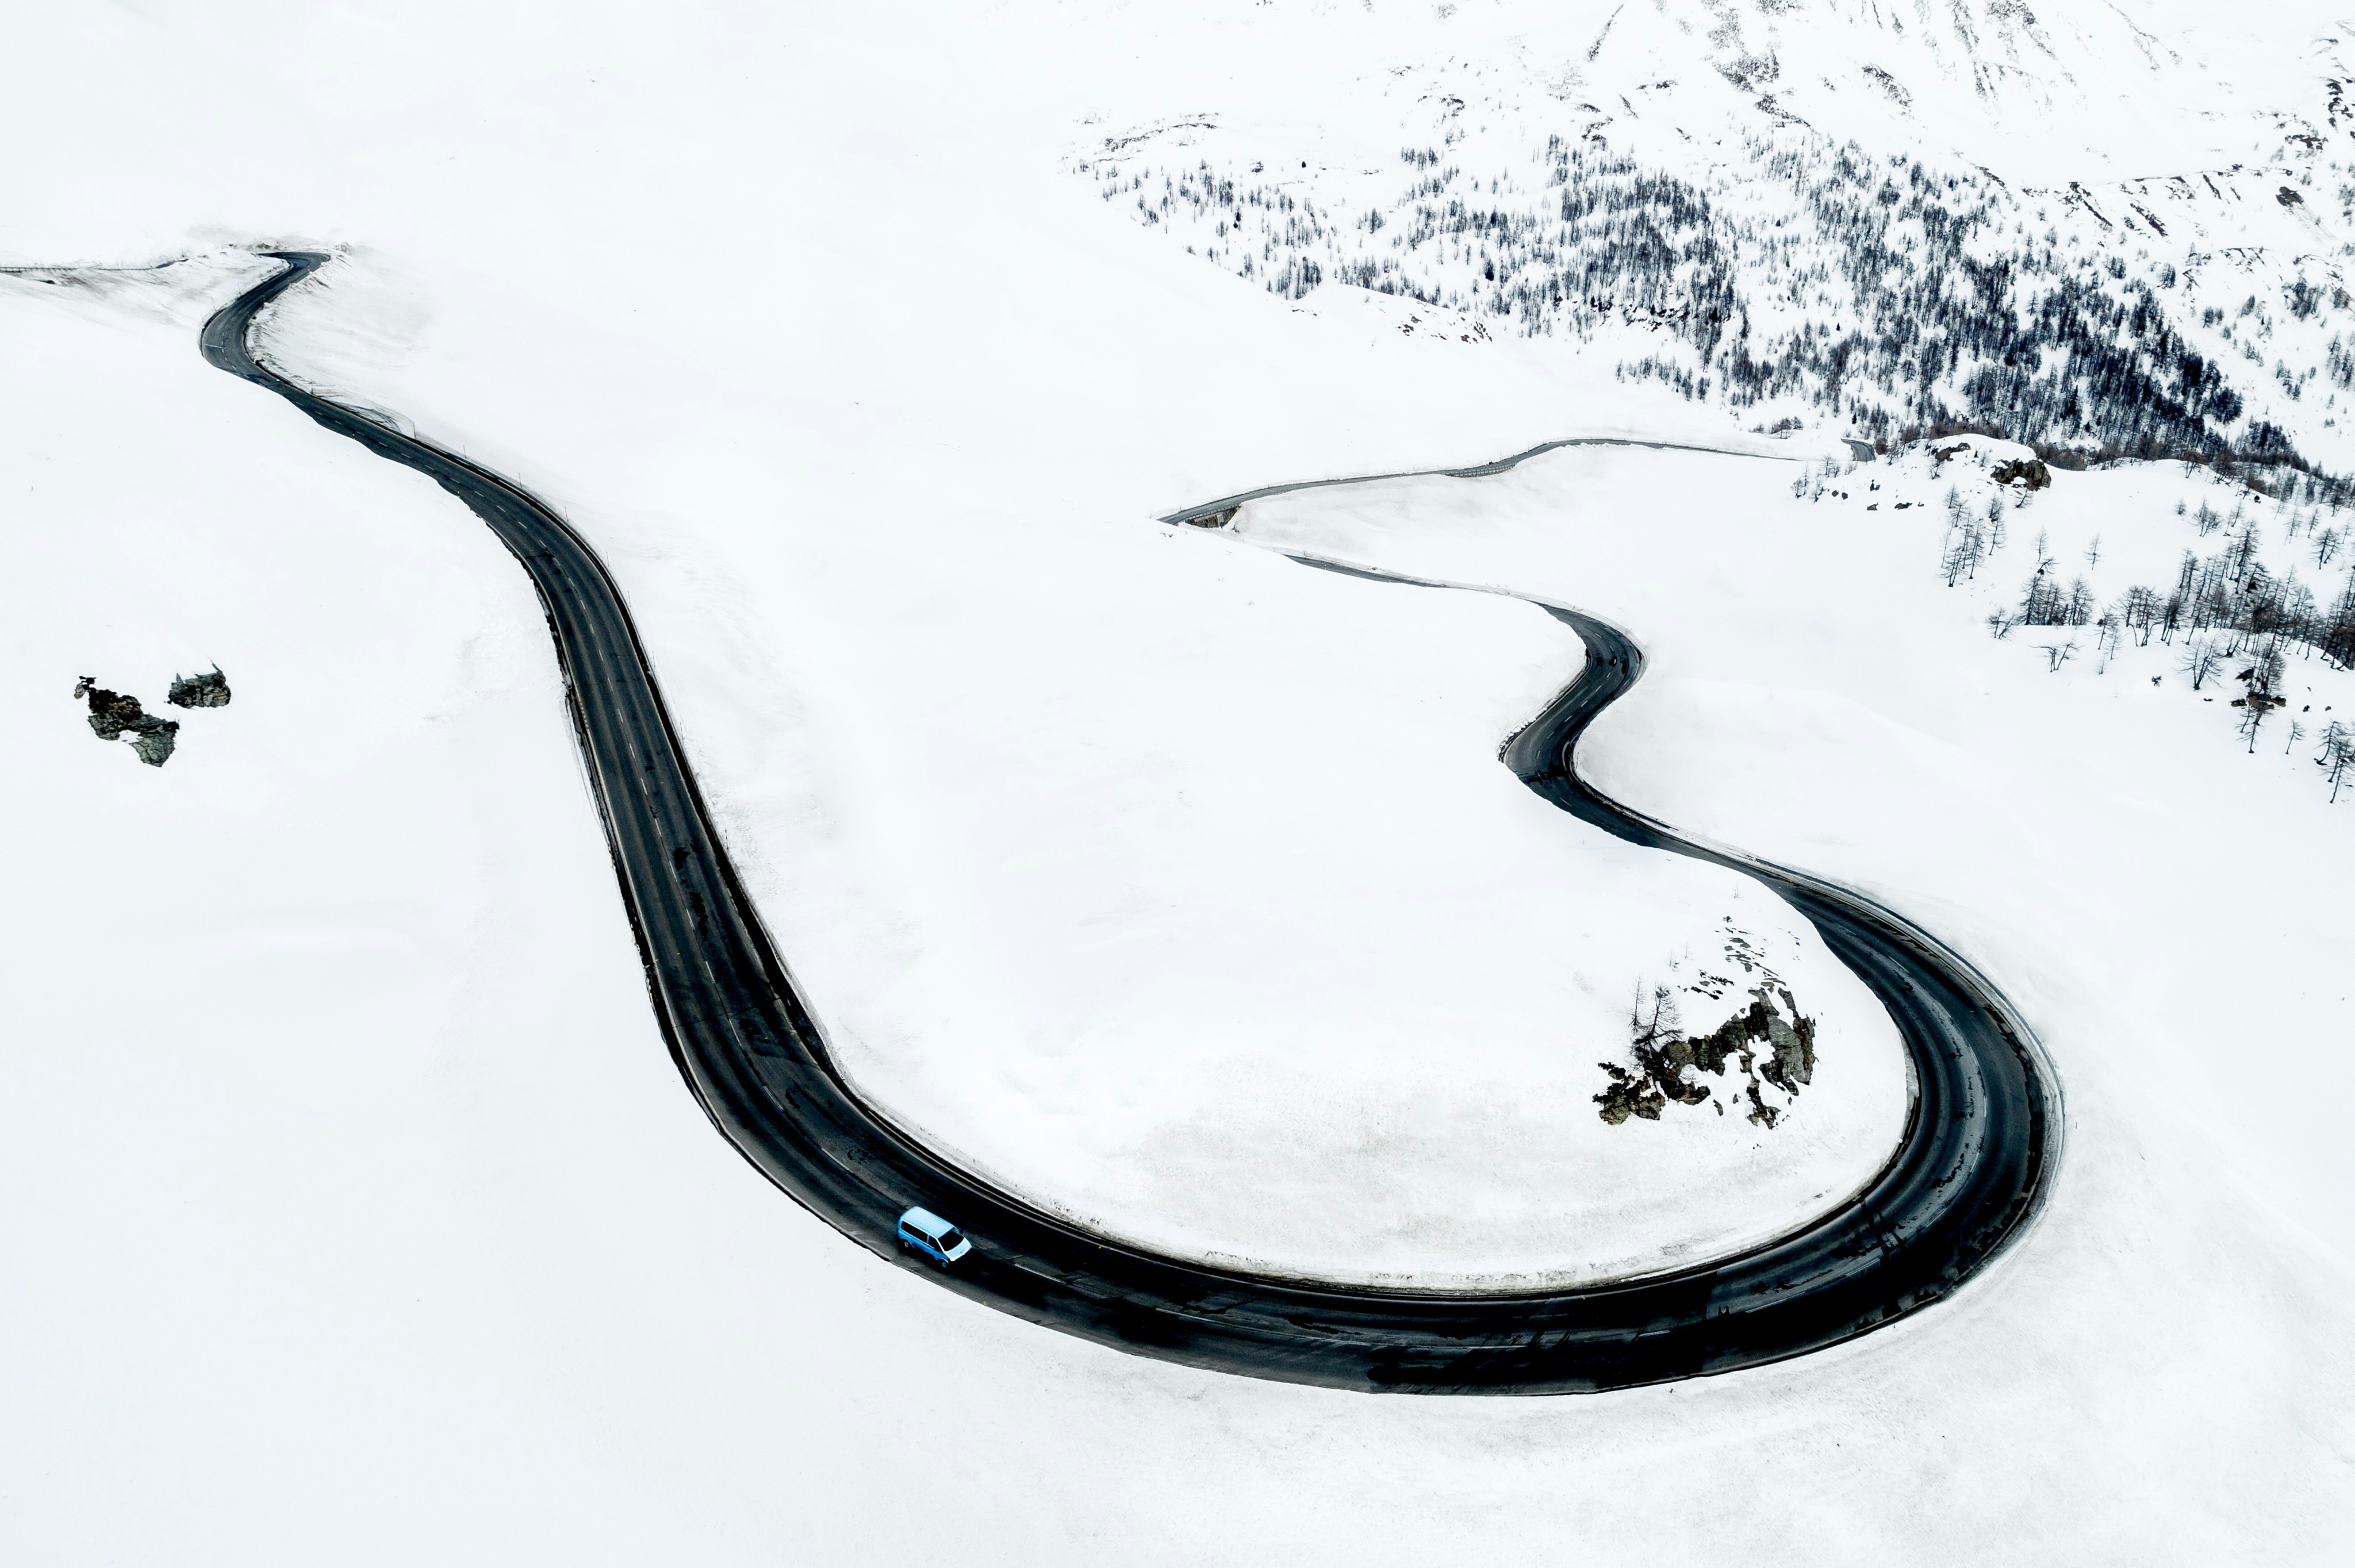 A car travels on a mountain road winding its way through a snowy landscape en route to St Moritz, Switzerland